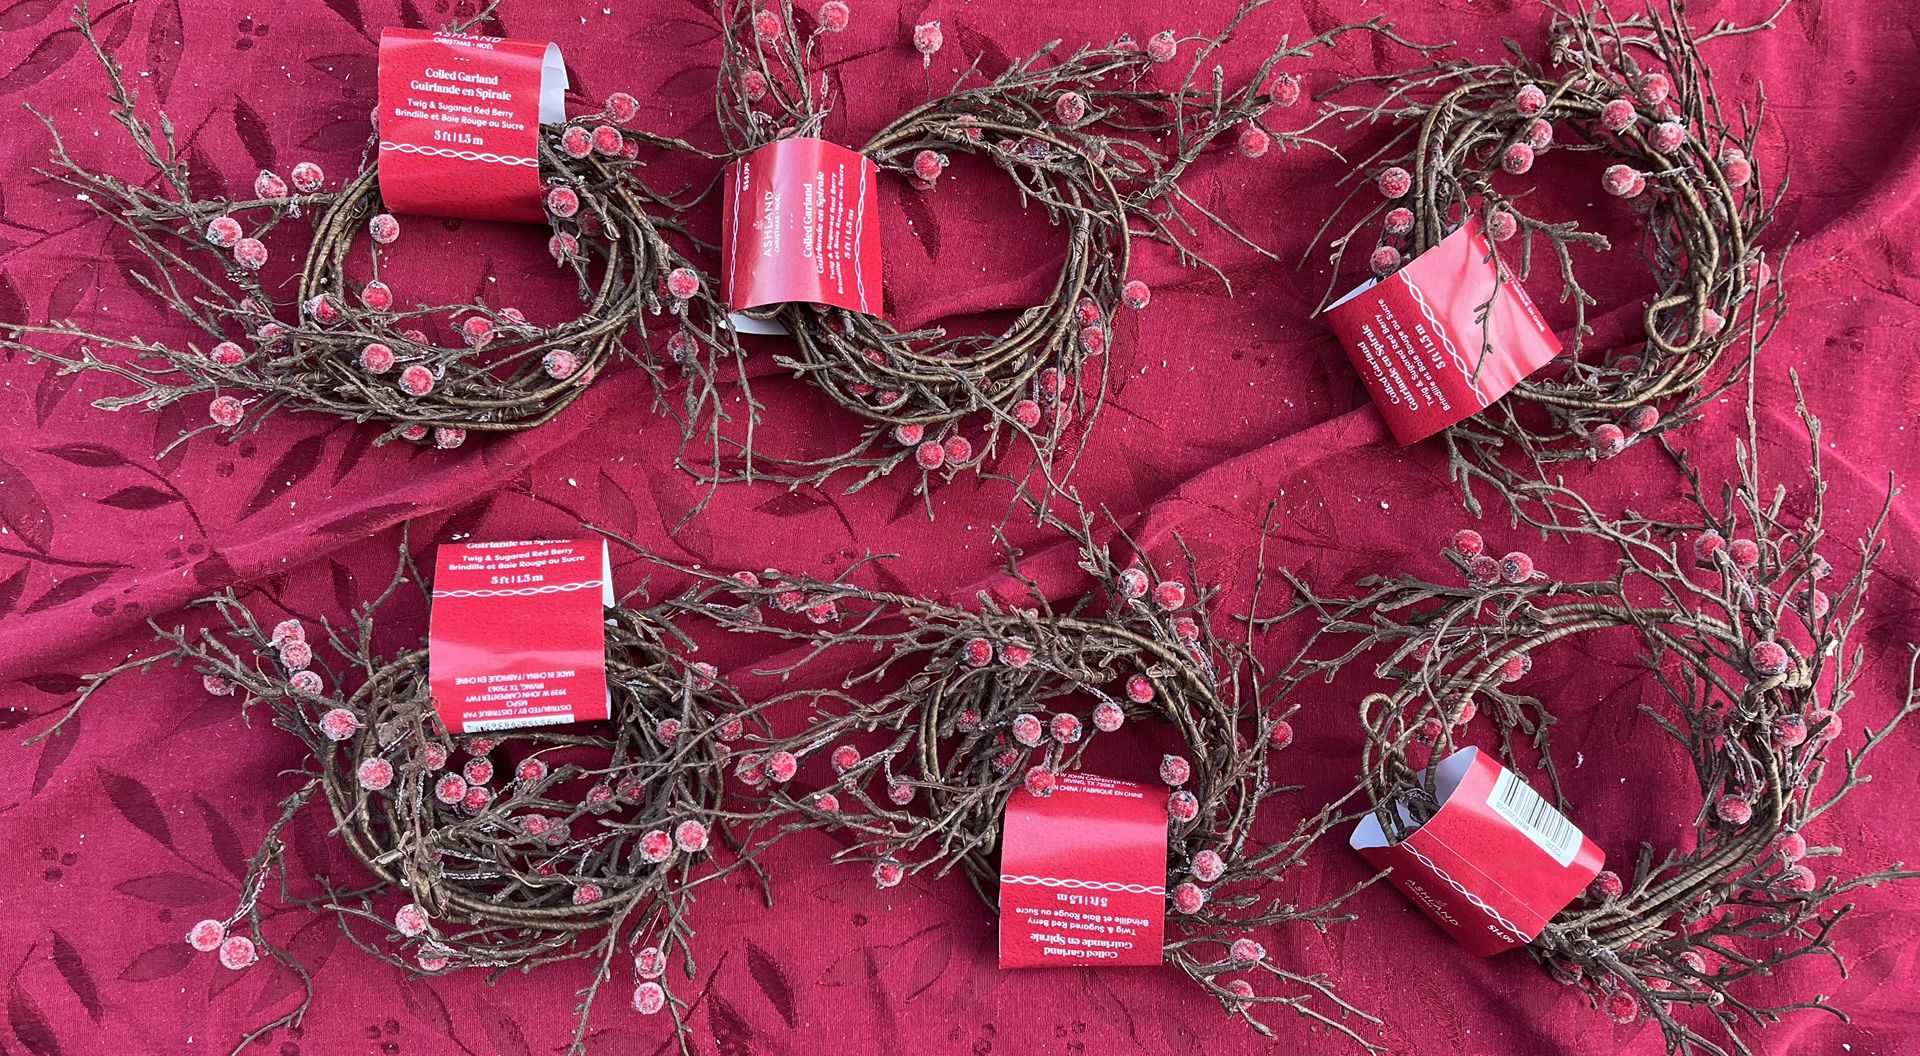 NWT 6 sets coiled Garland 5 feet each faux twig & sugared red berries 